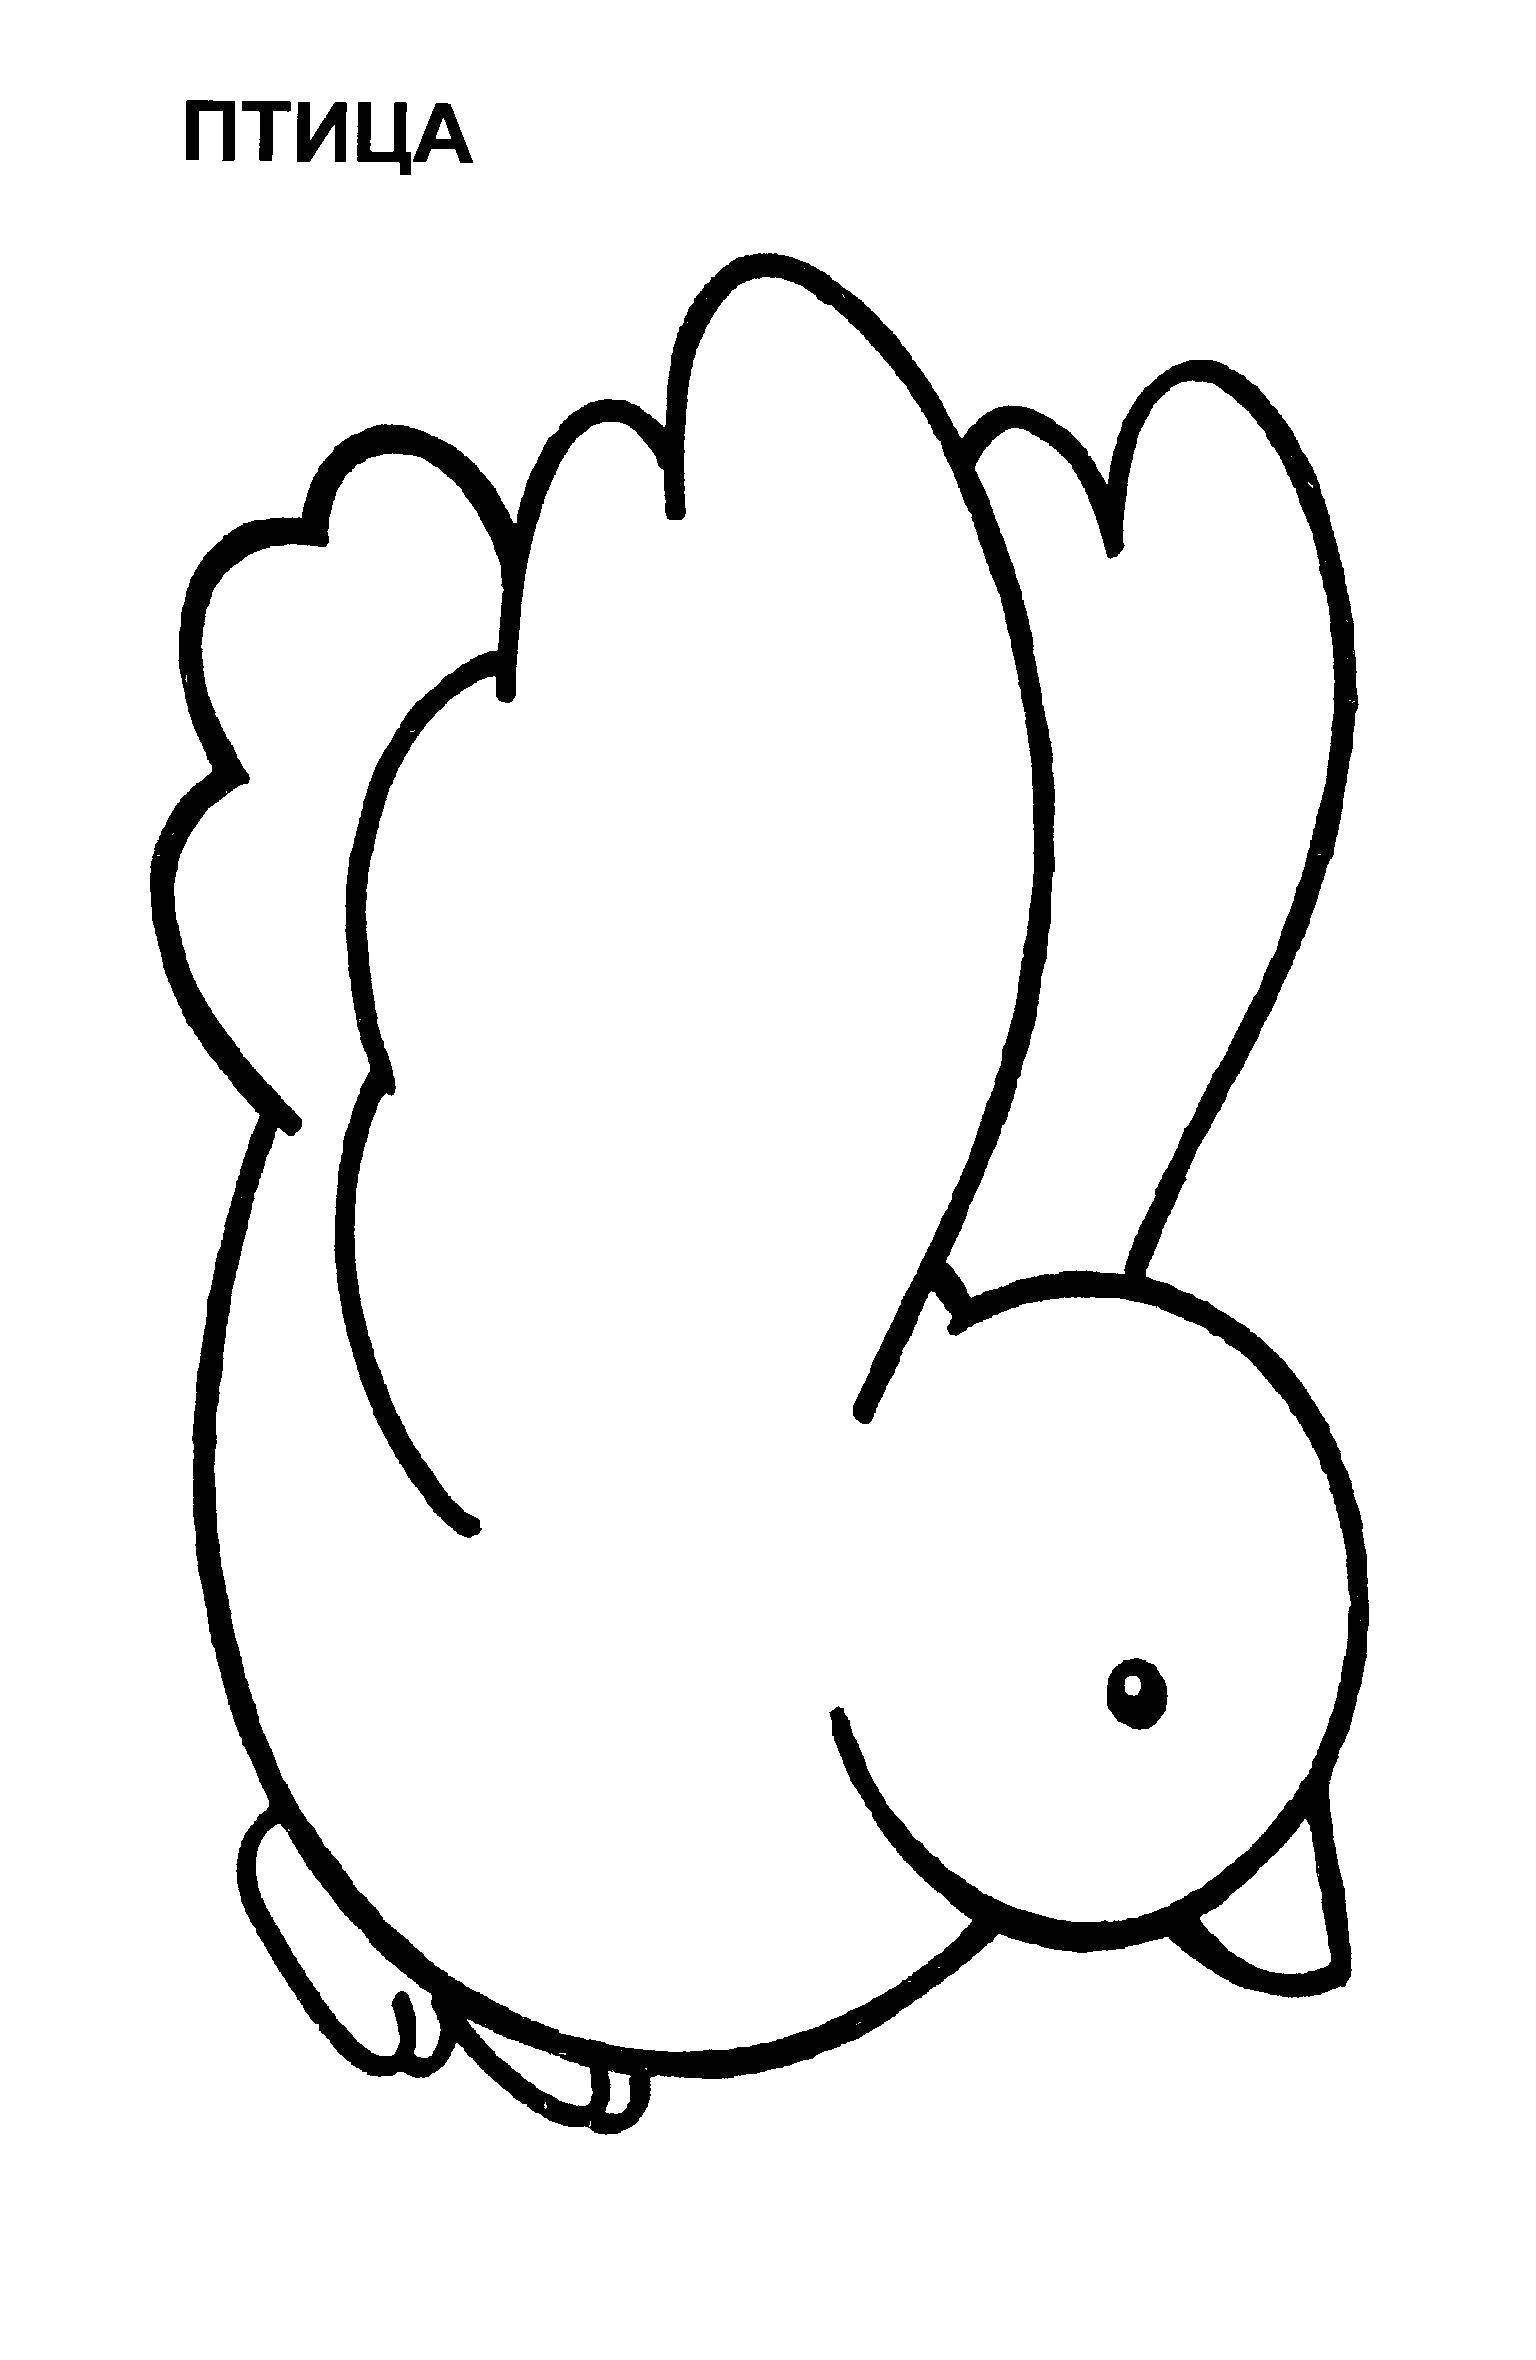 Coloring Bird. Category Coloring pages for kids. Tags:  bird.